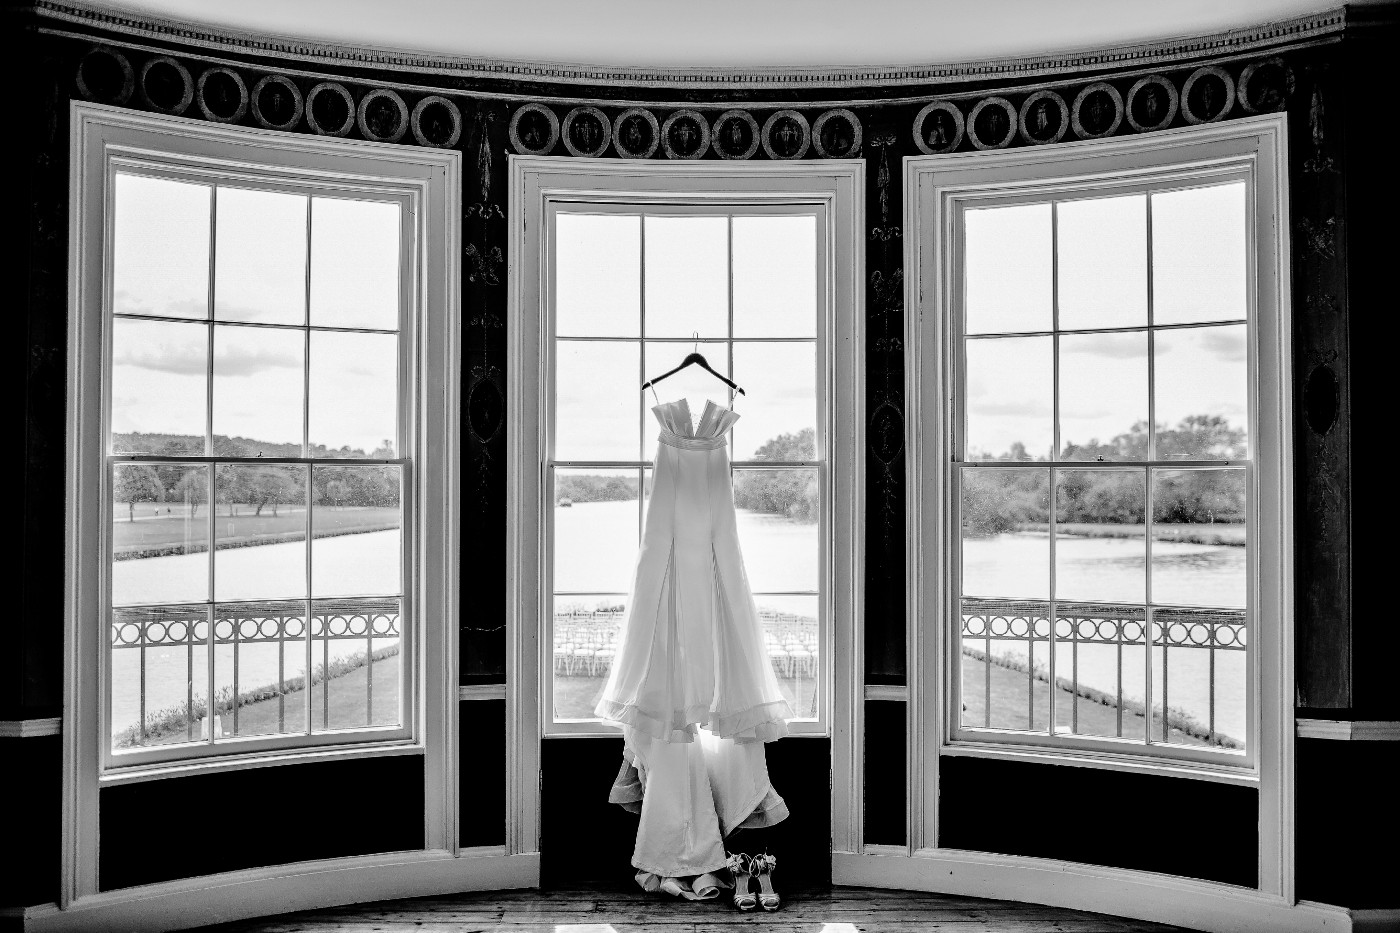 Wedding gown image